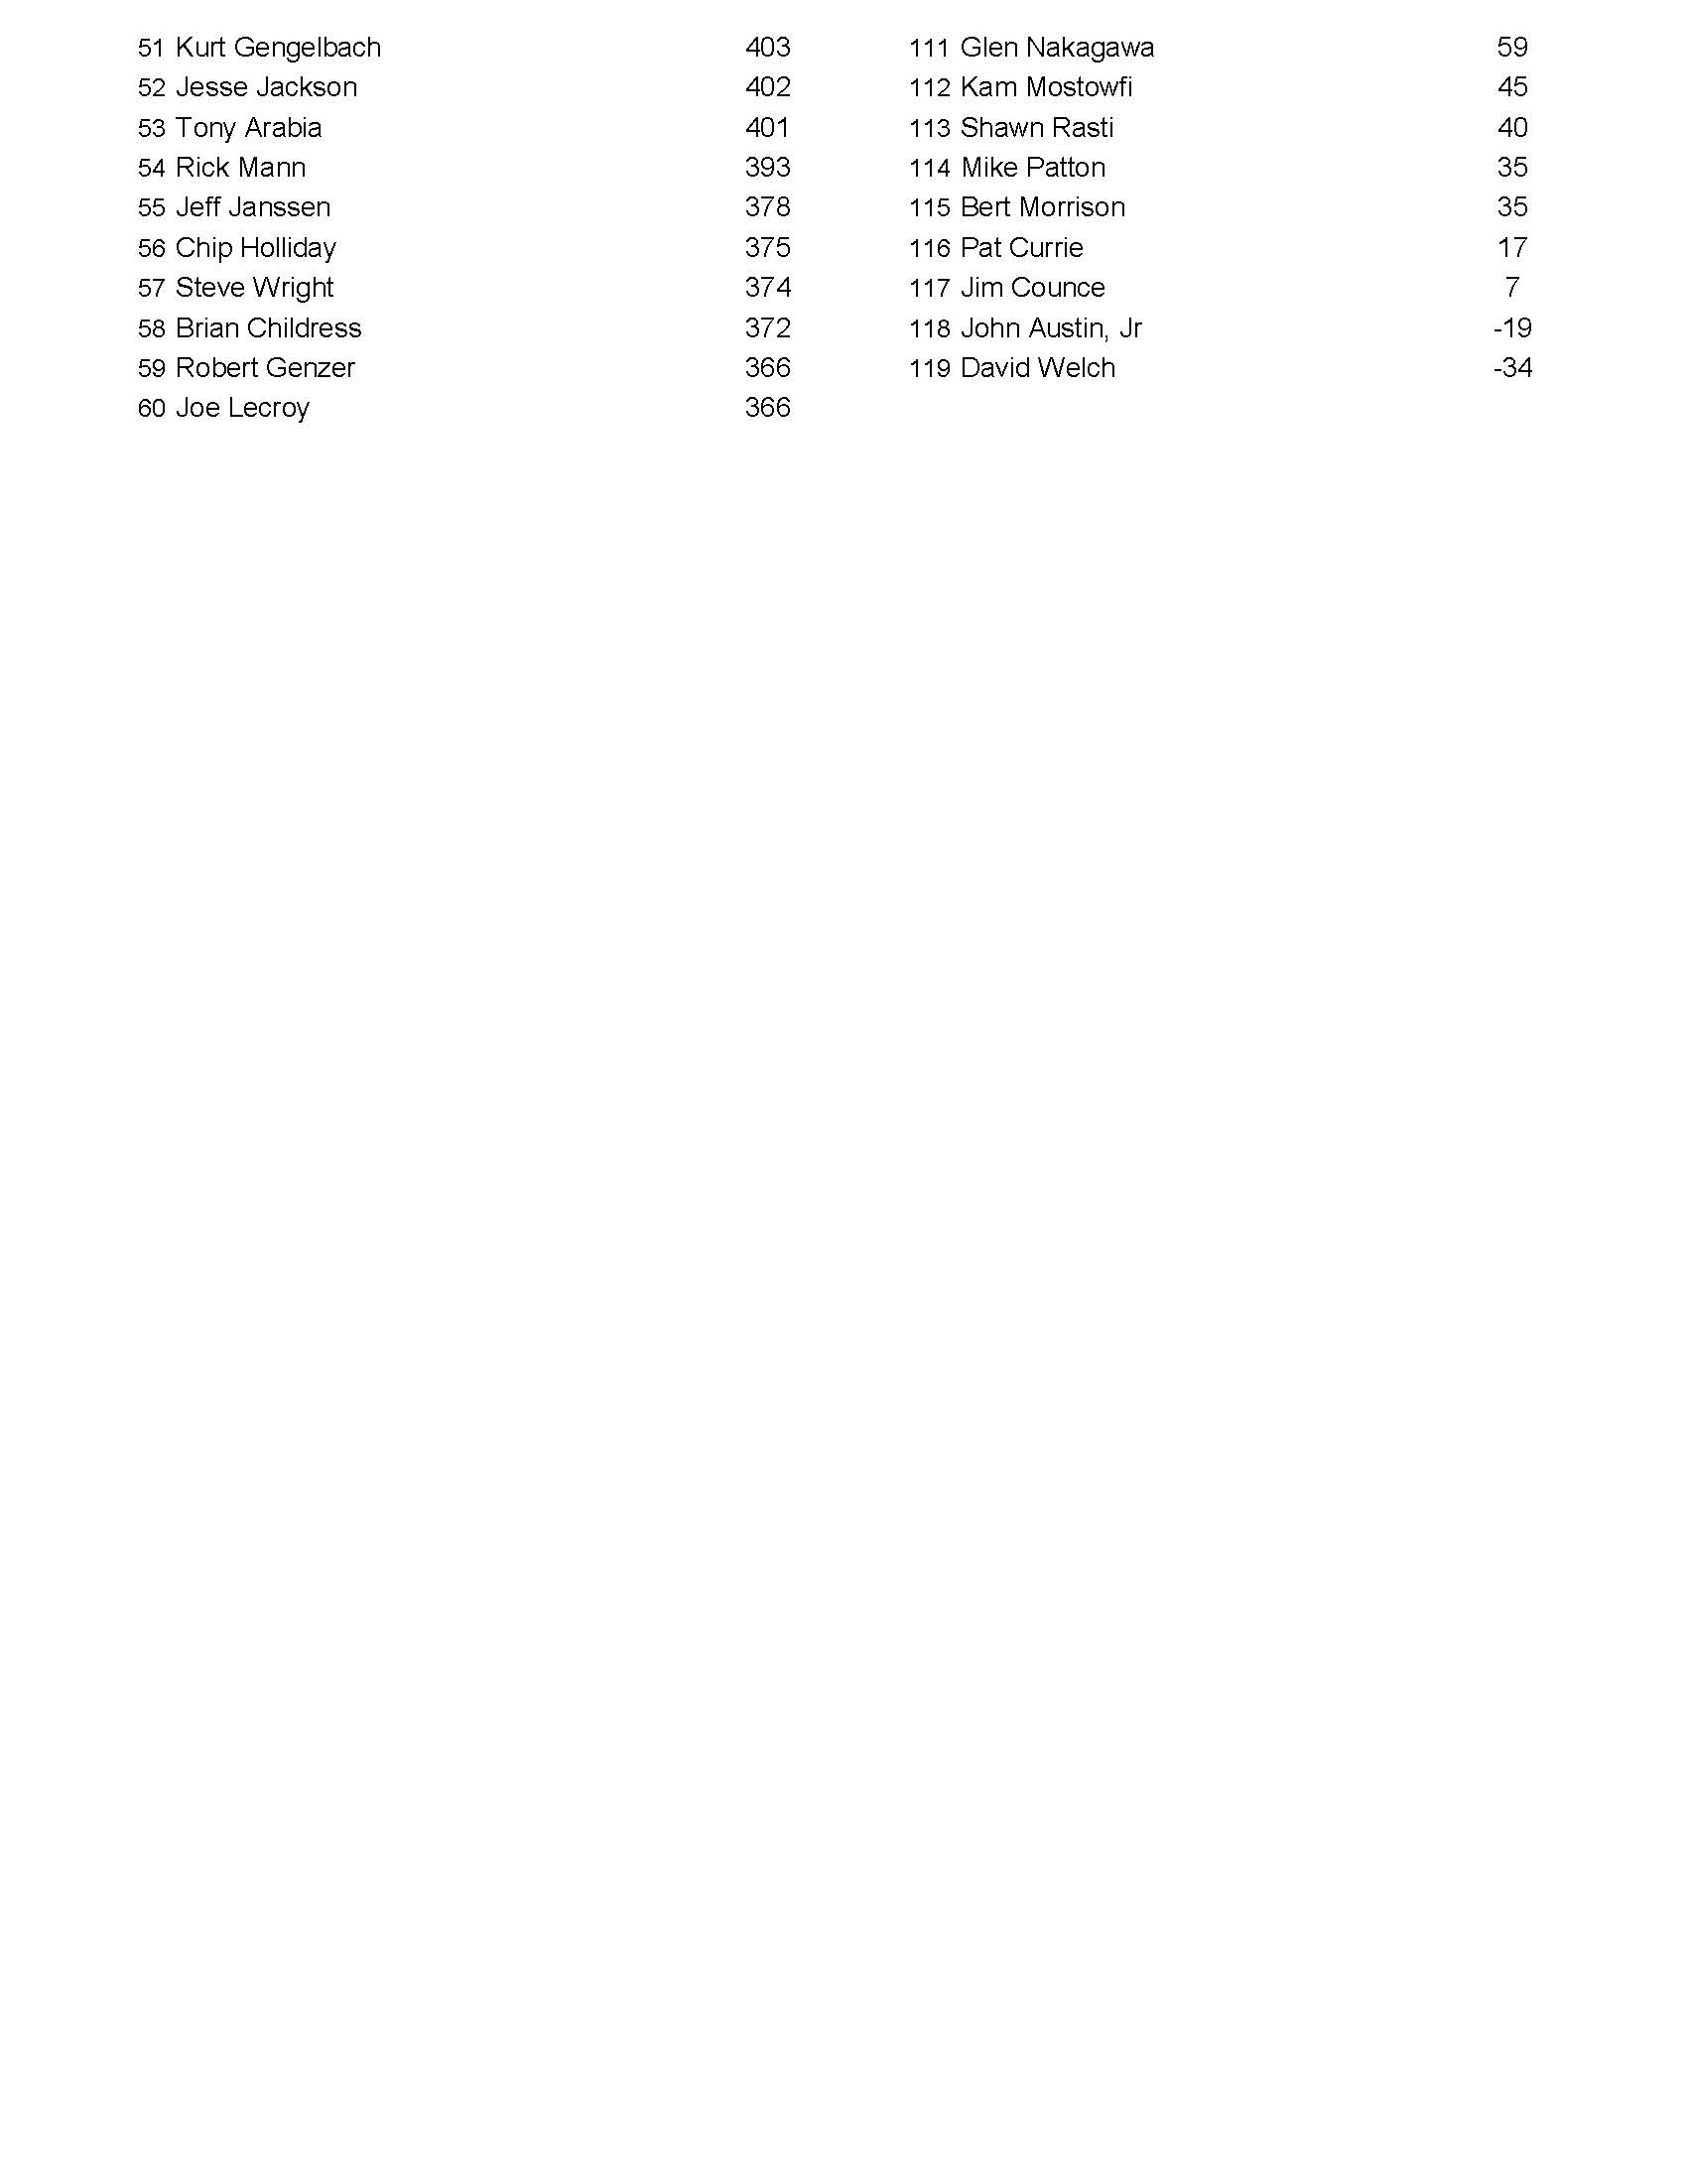 10042020results_Page_4